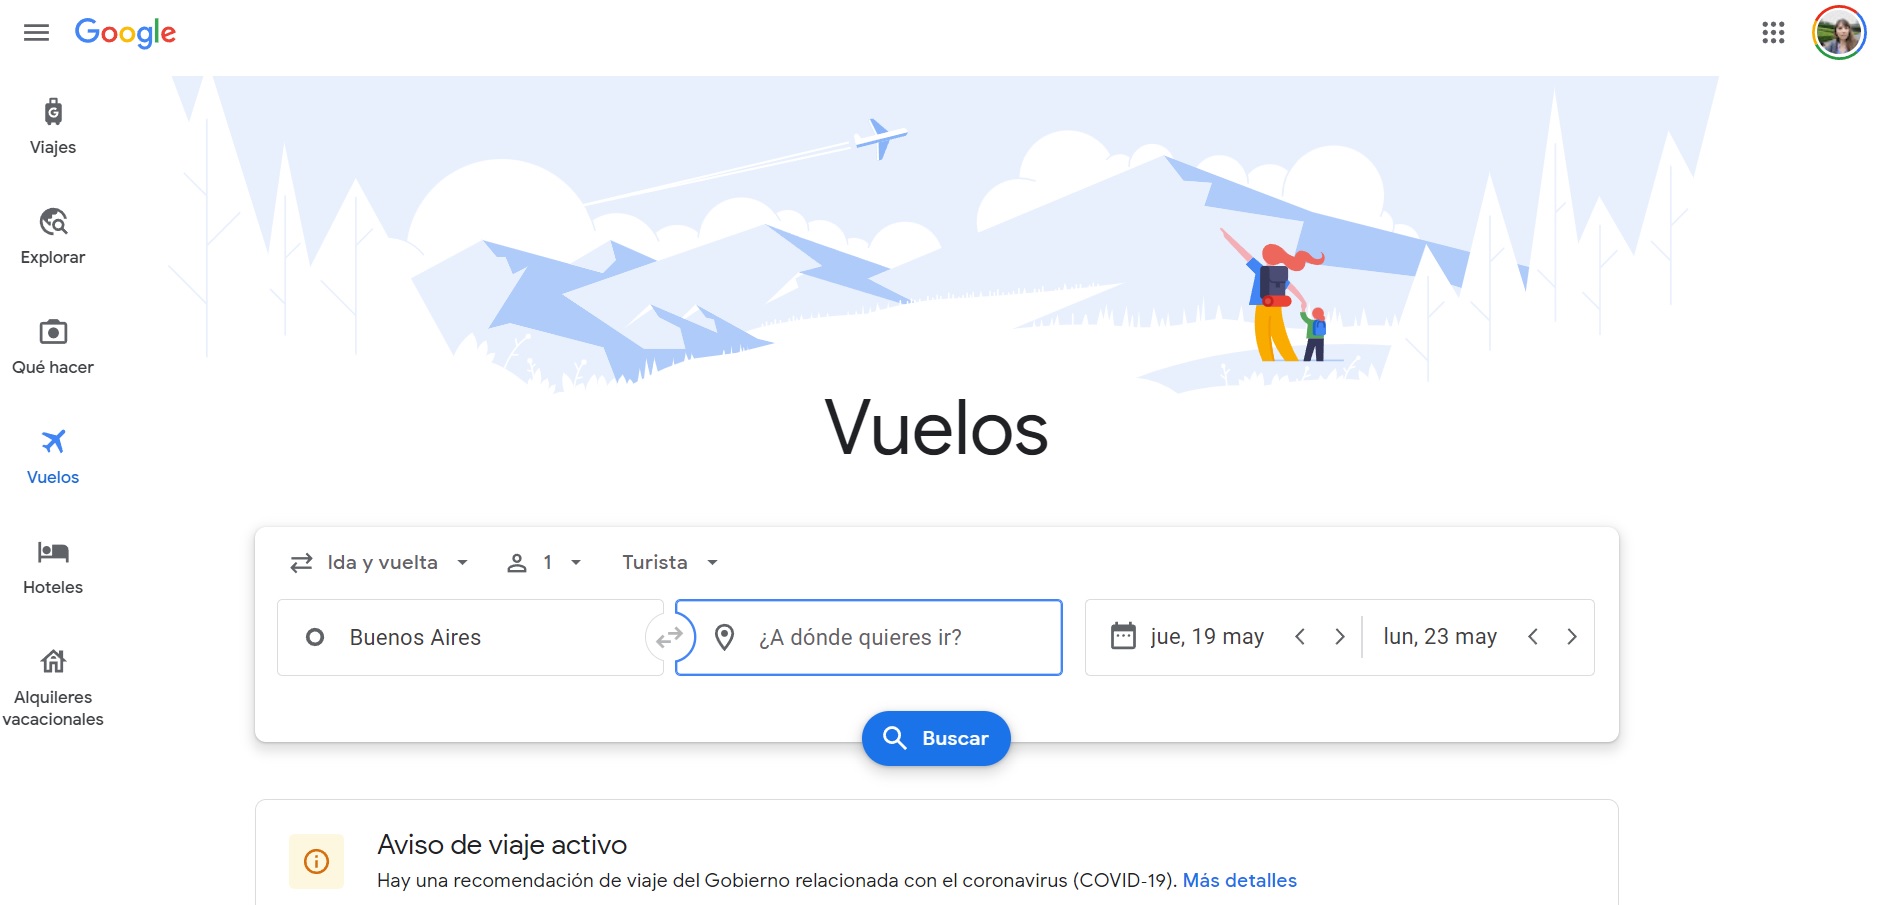 Now in Google Flights, users will be able to receive email notifications if better deals are found compared to their searches